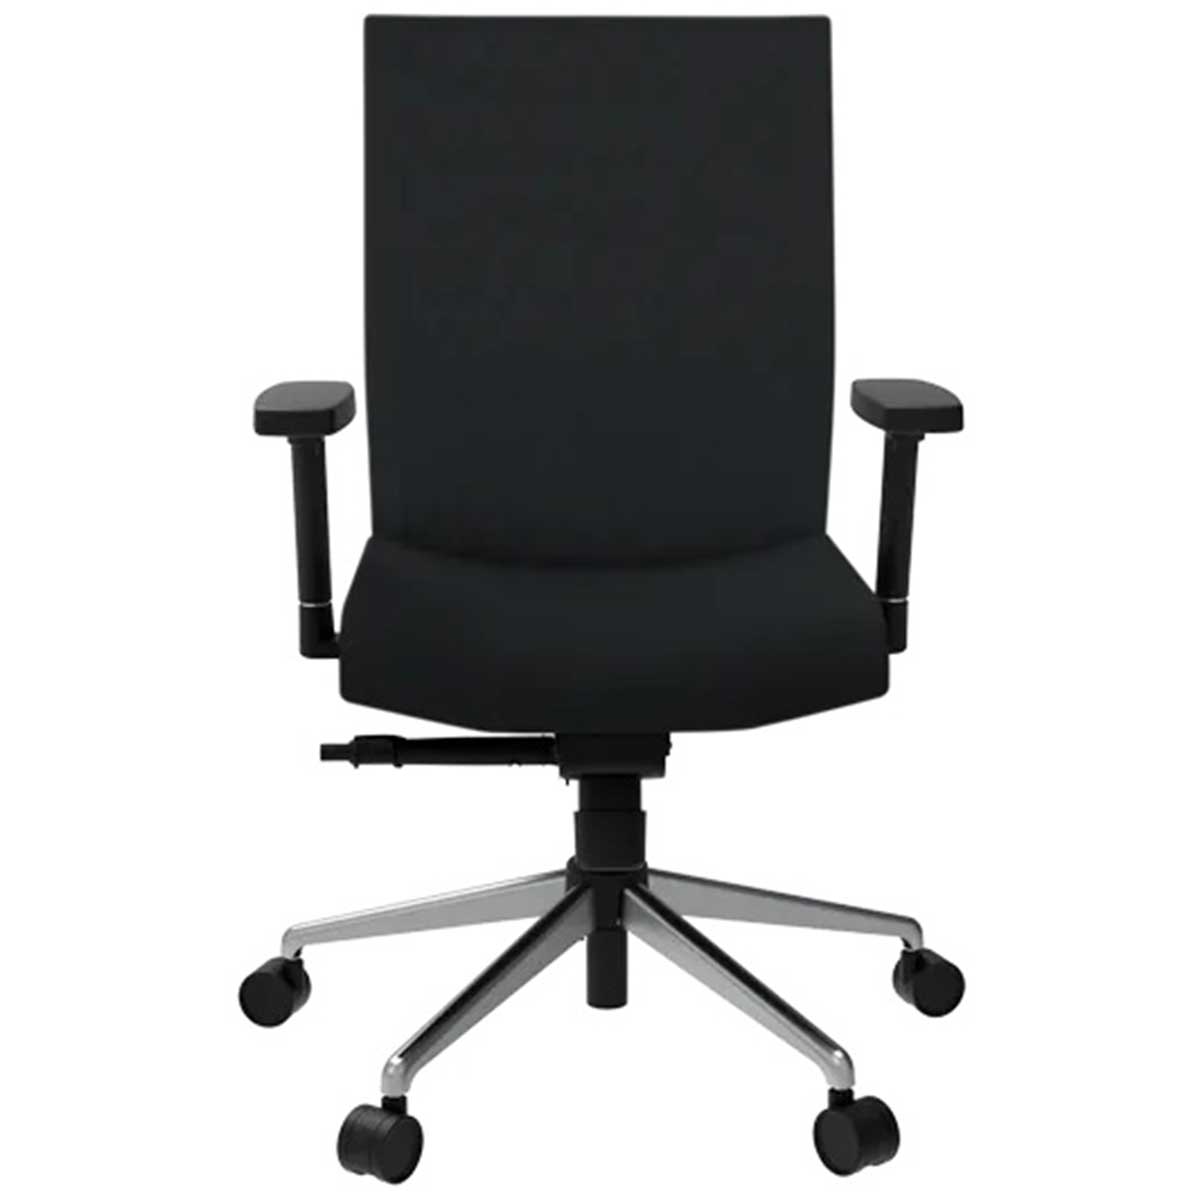 Staff Chair Manufacturers, Suppliers in Rohini Extension